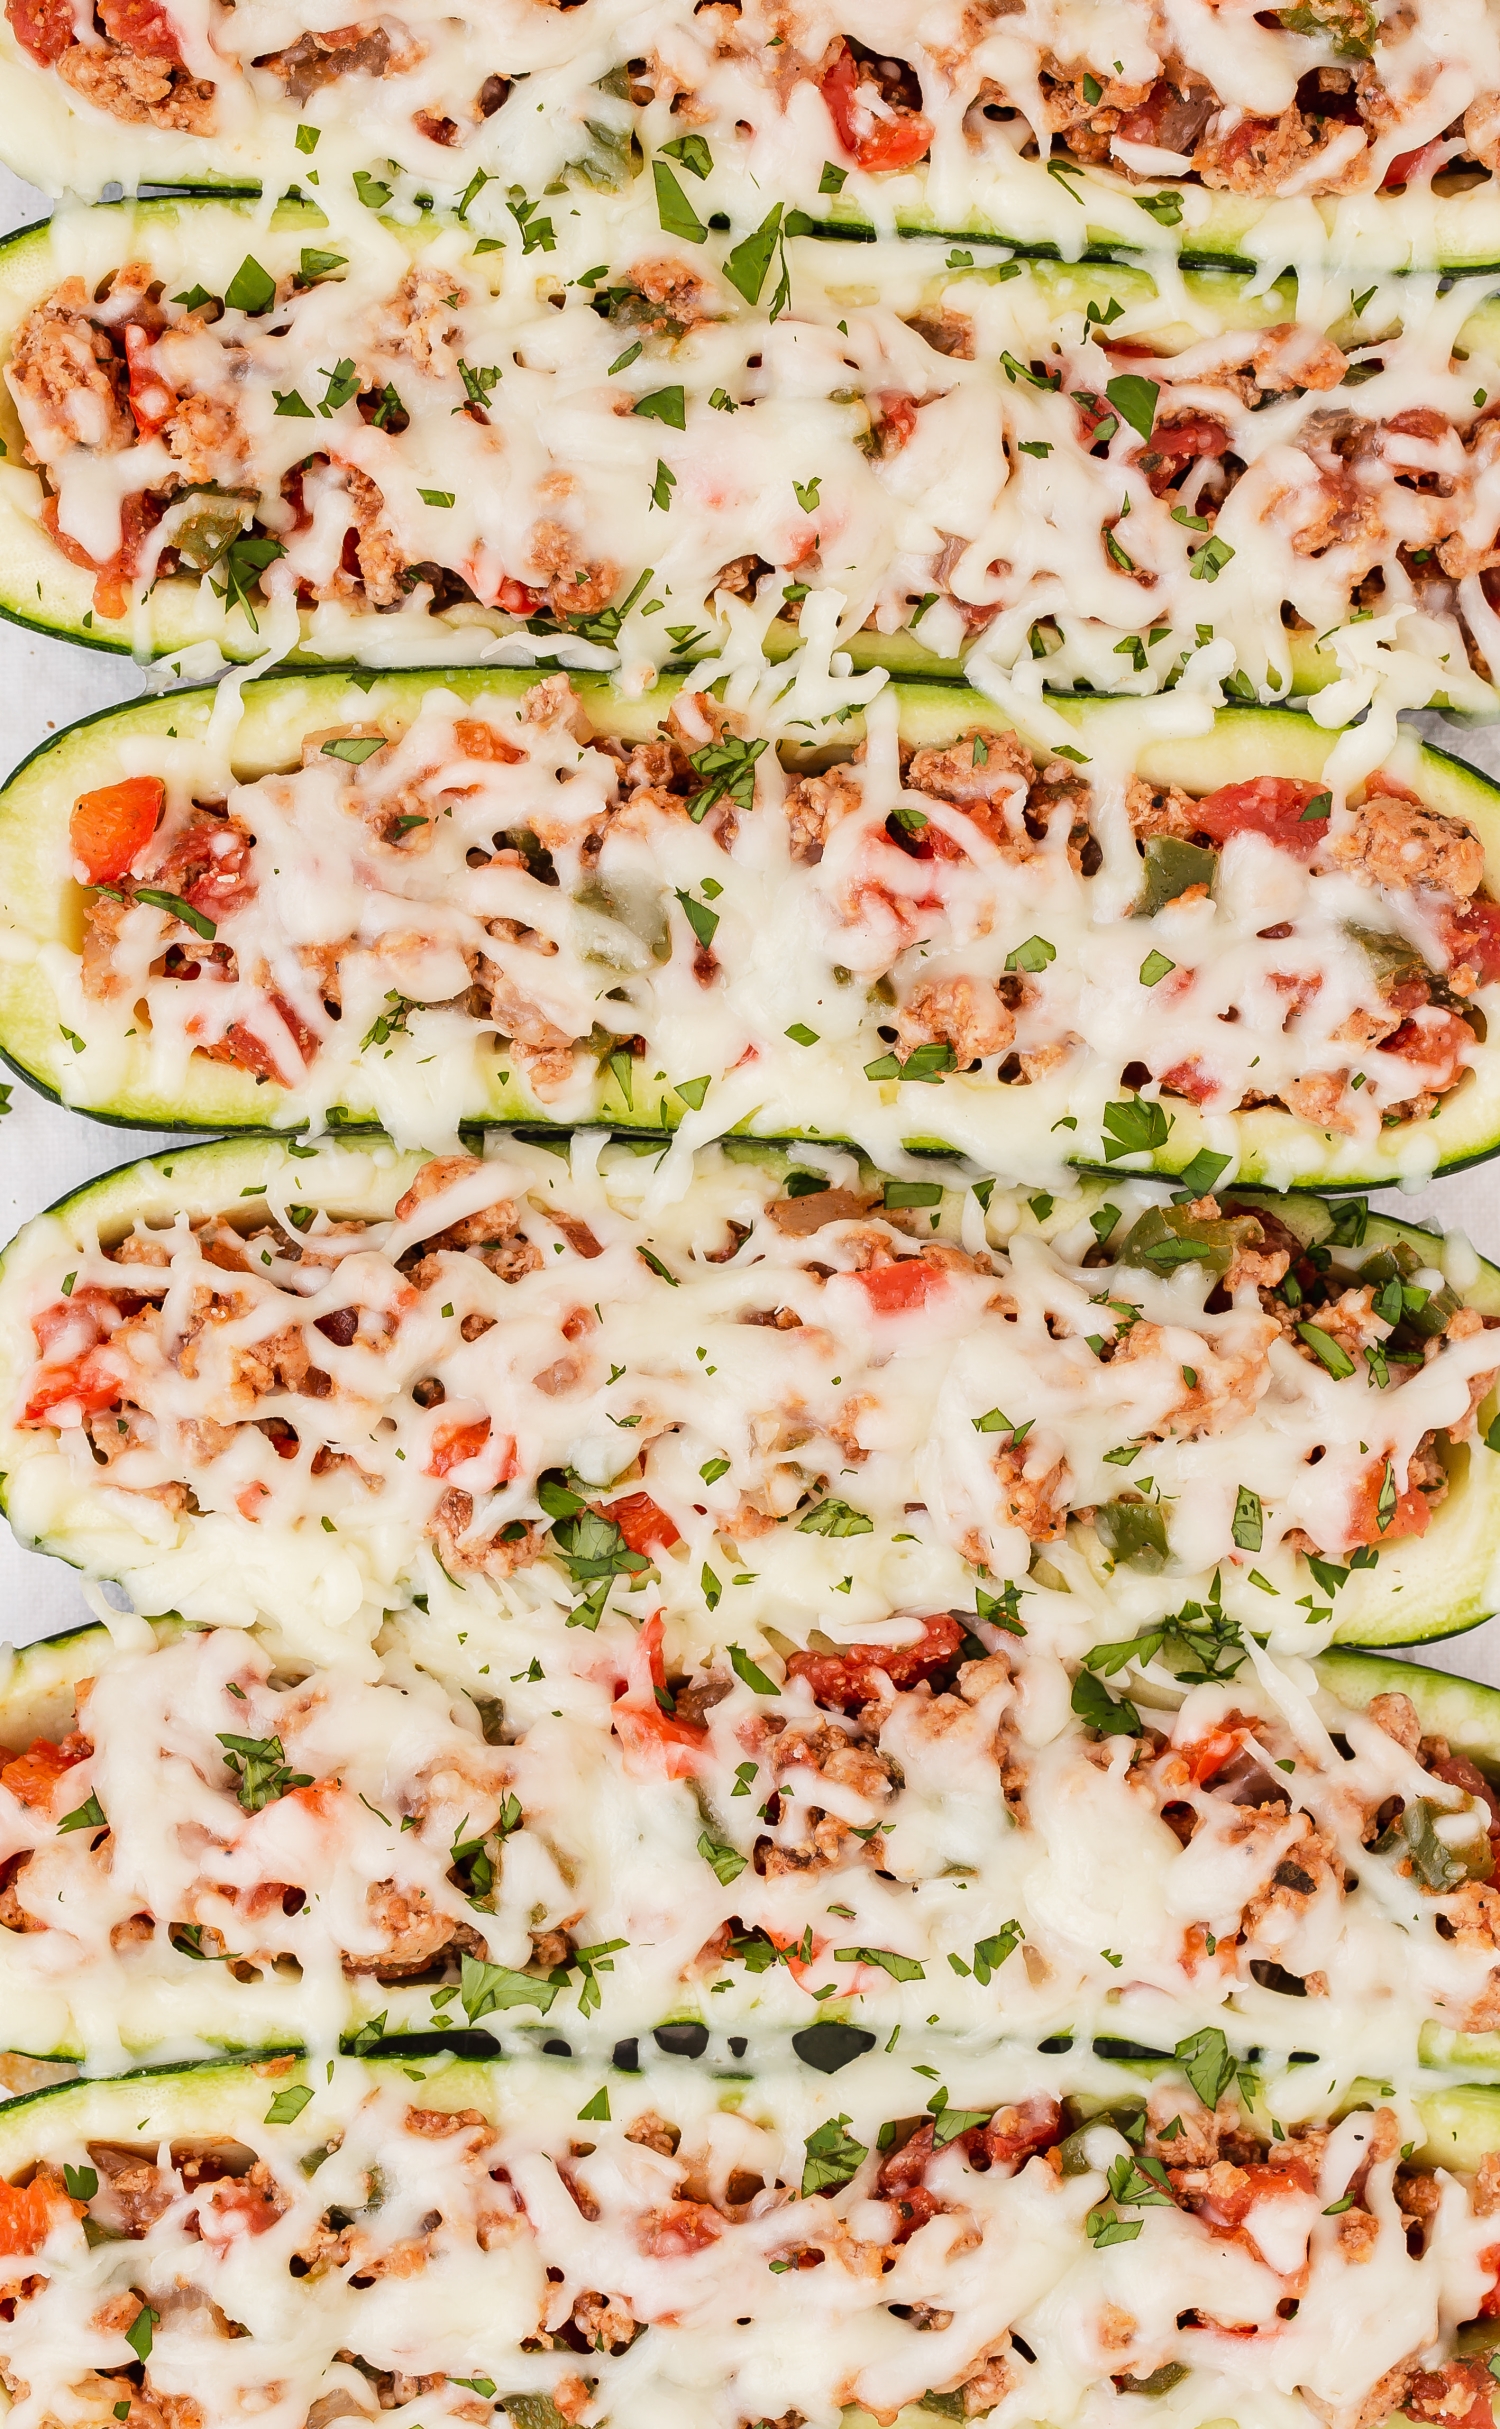 Taco zucchini boats with ground turkey, chunky salsa, and melted cheese.